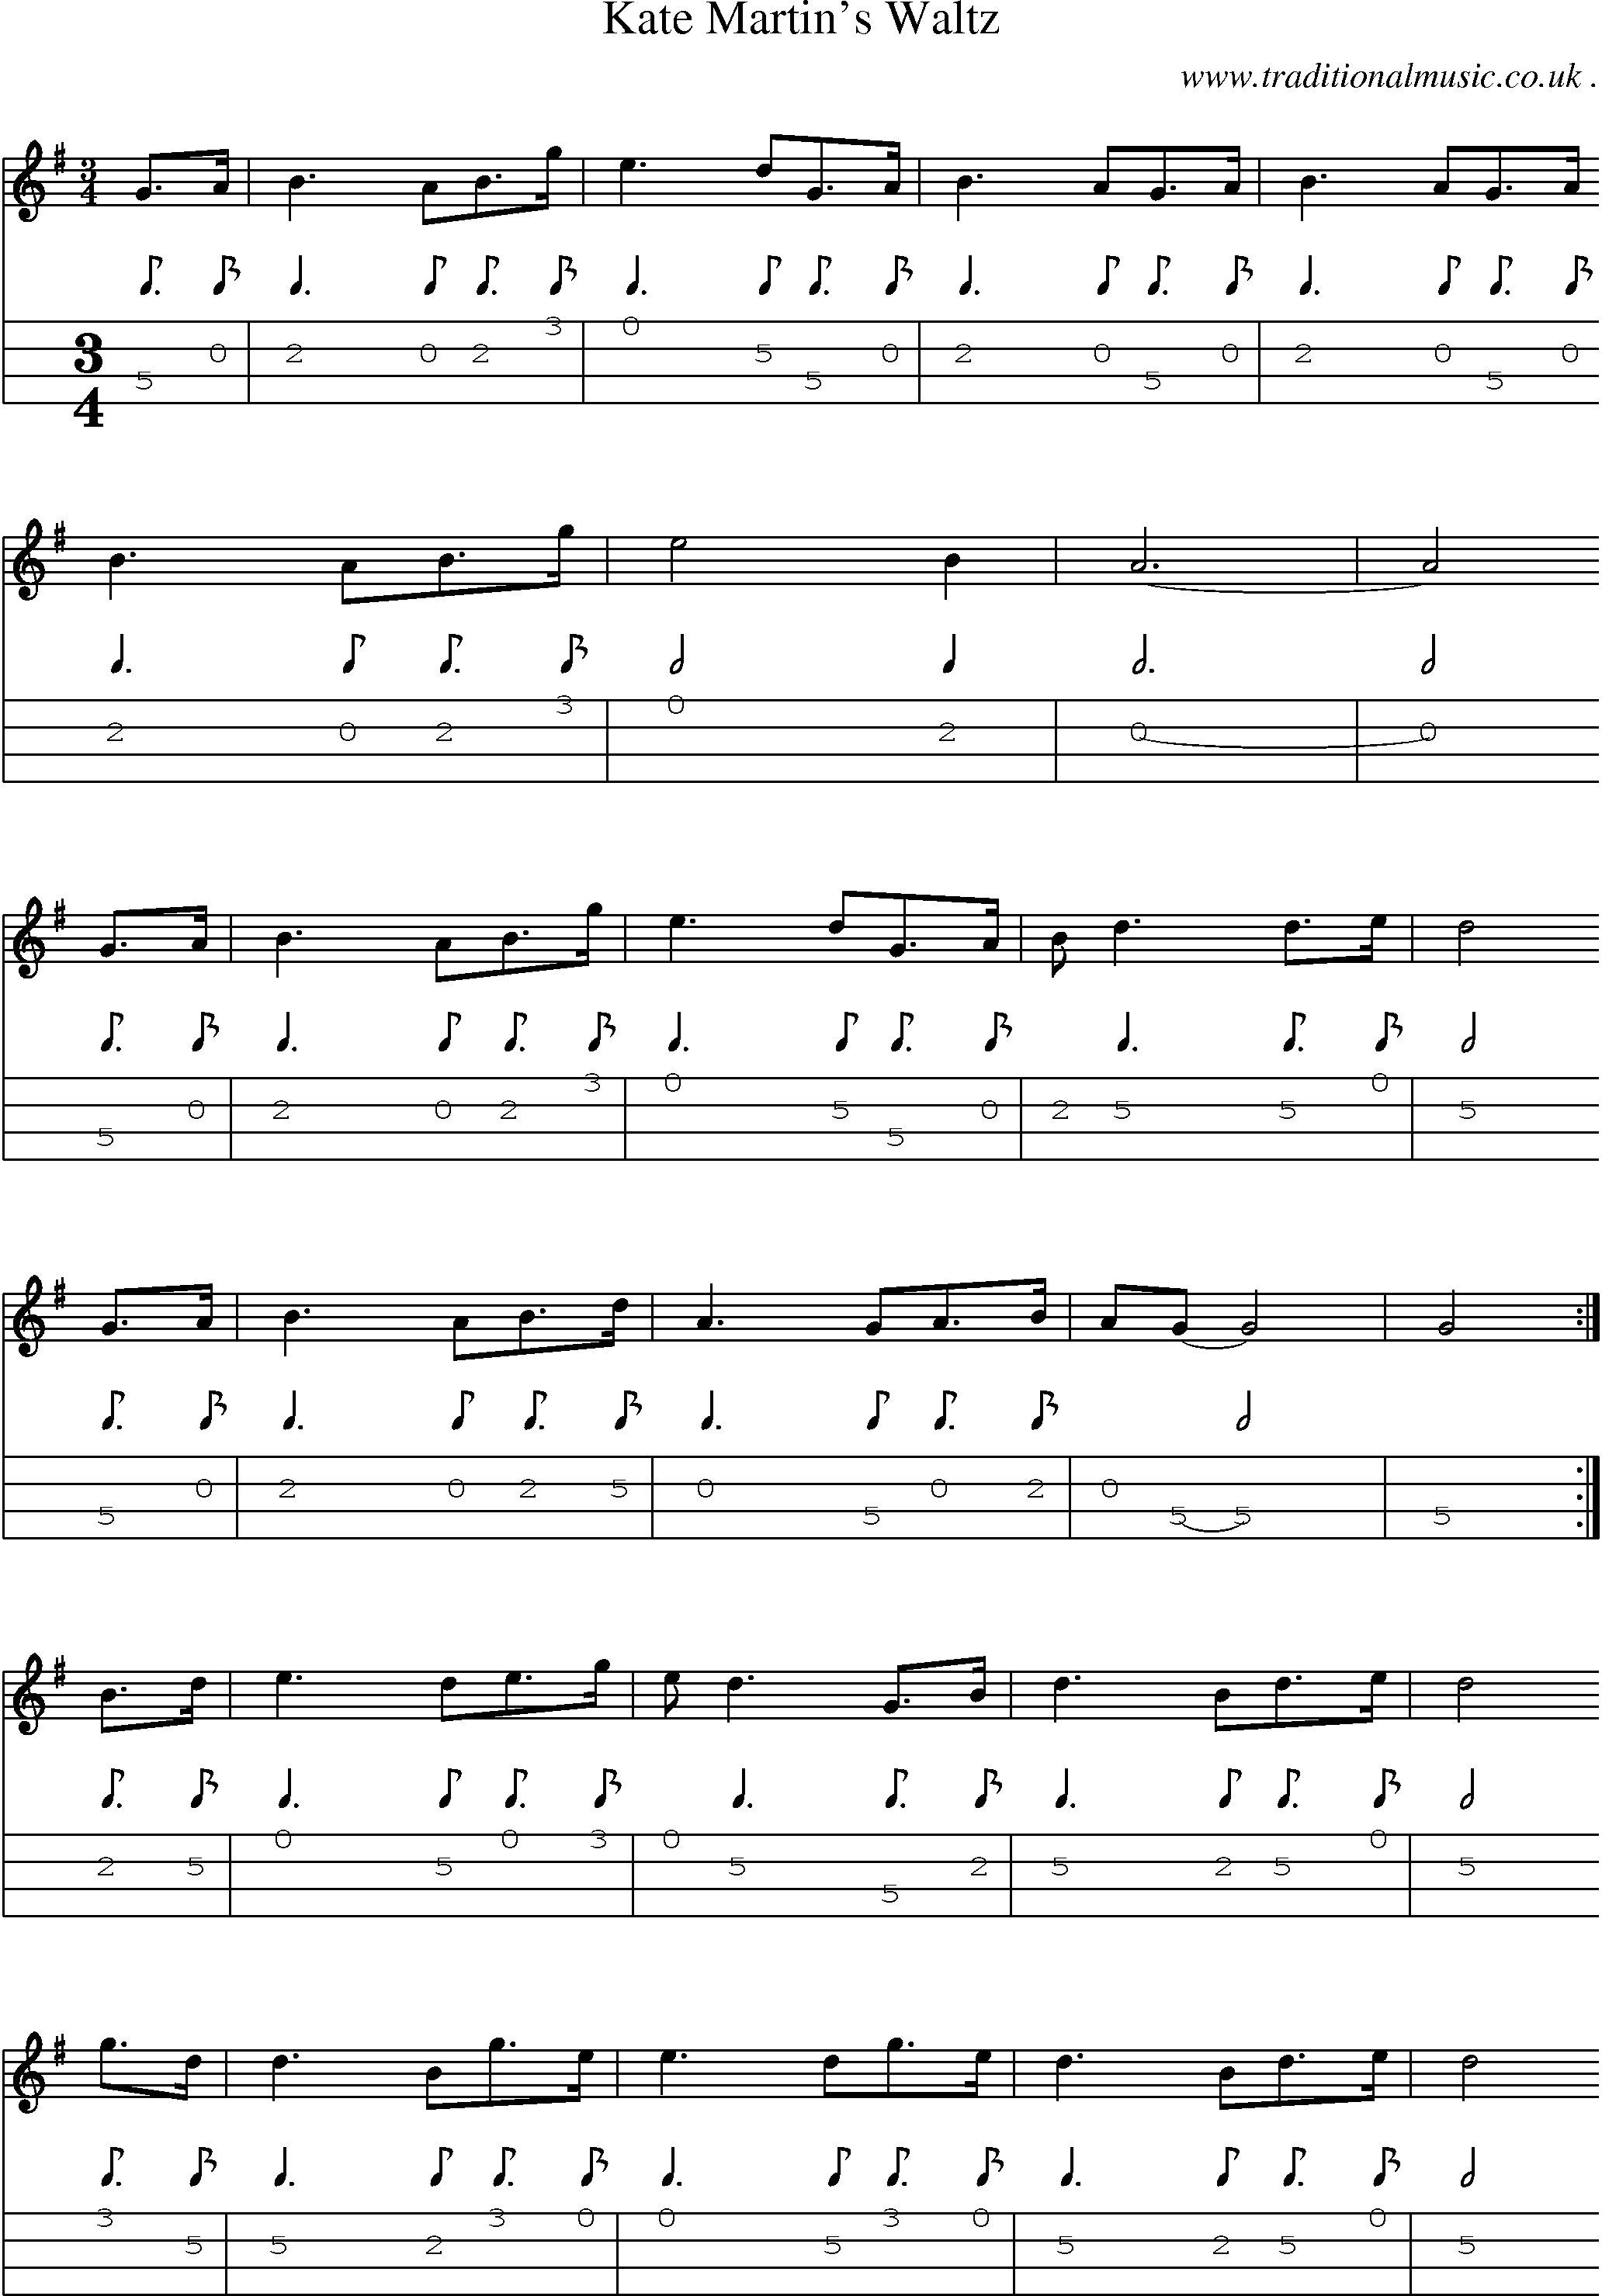 Sheet-music  score, Chords and Mandolin Tabs for Kate Martins Waltz